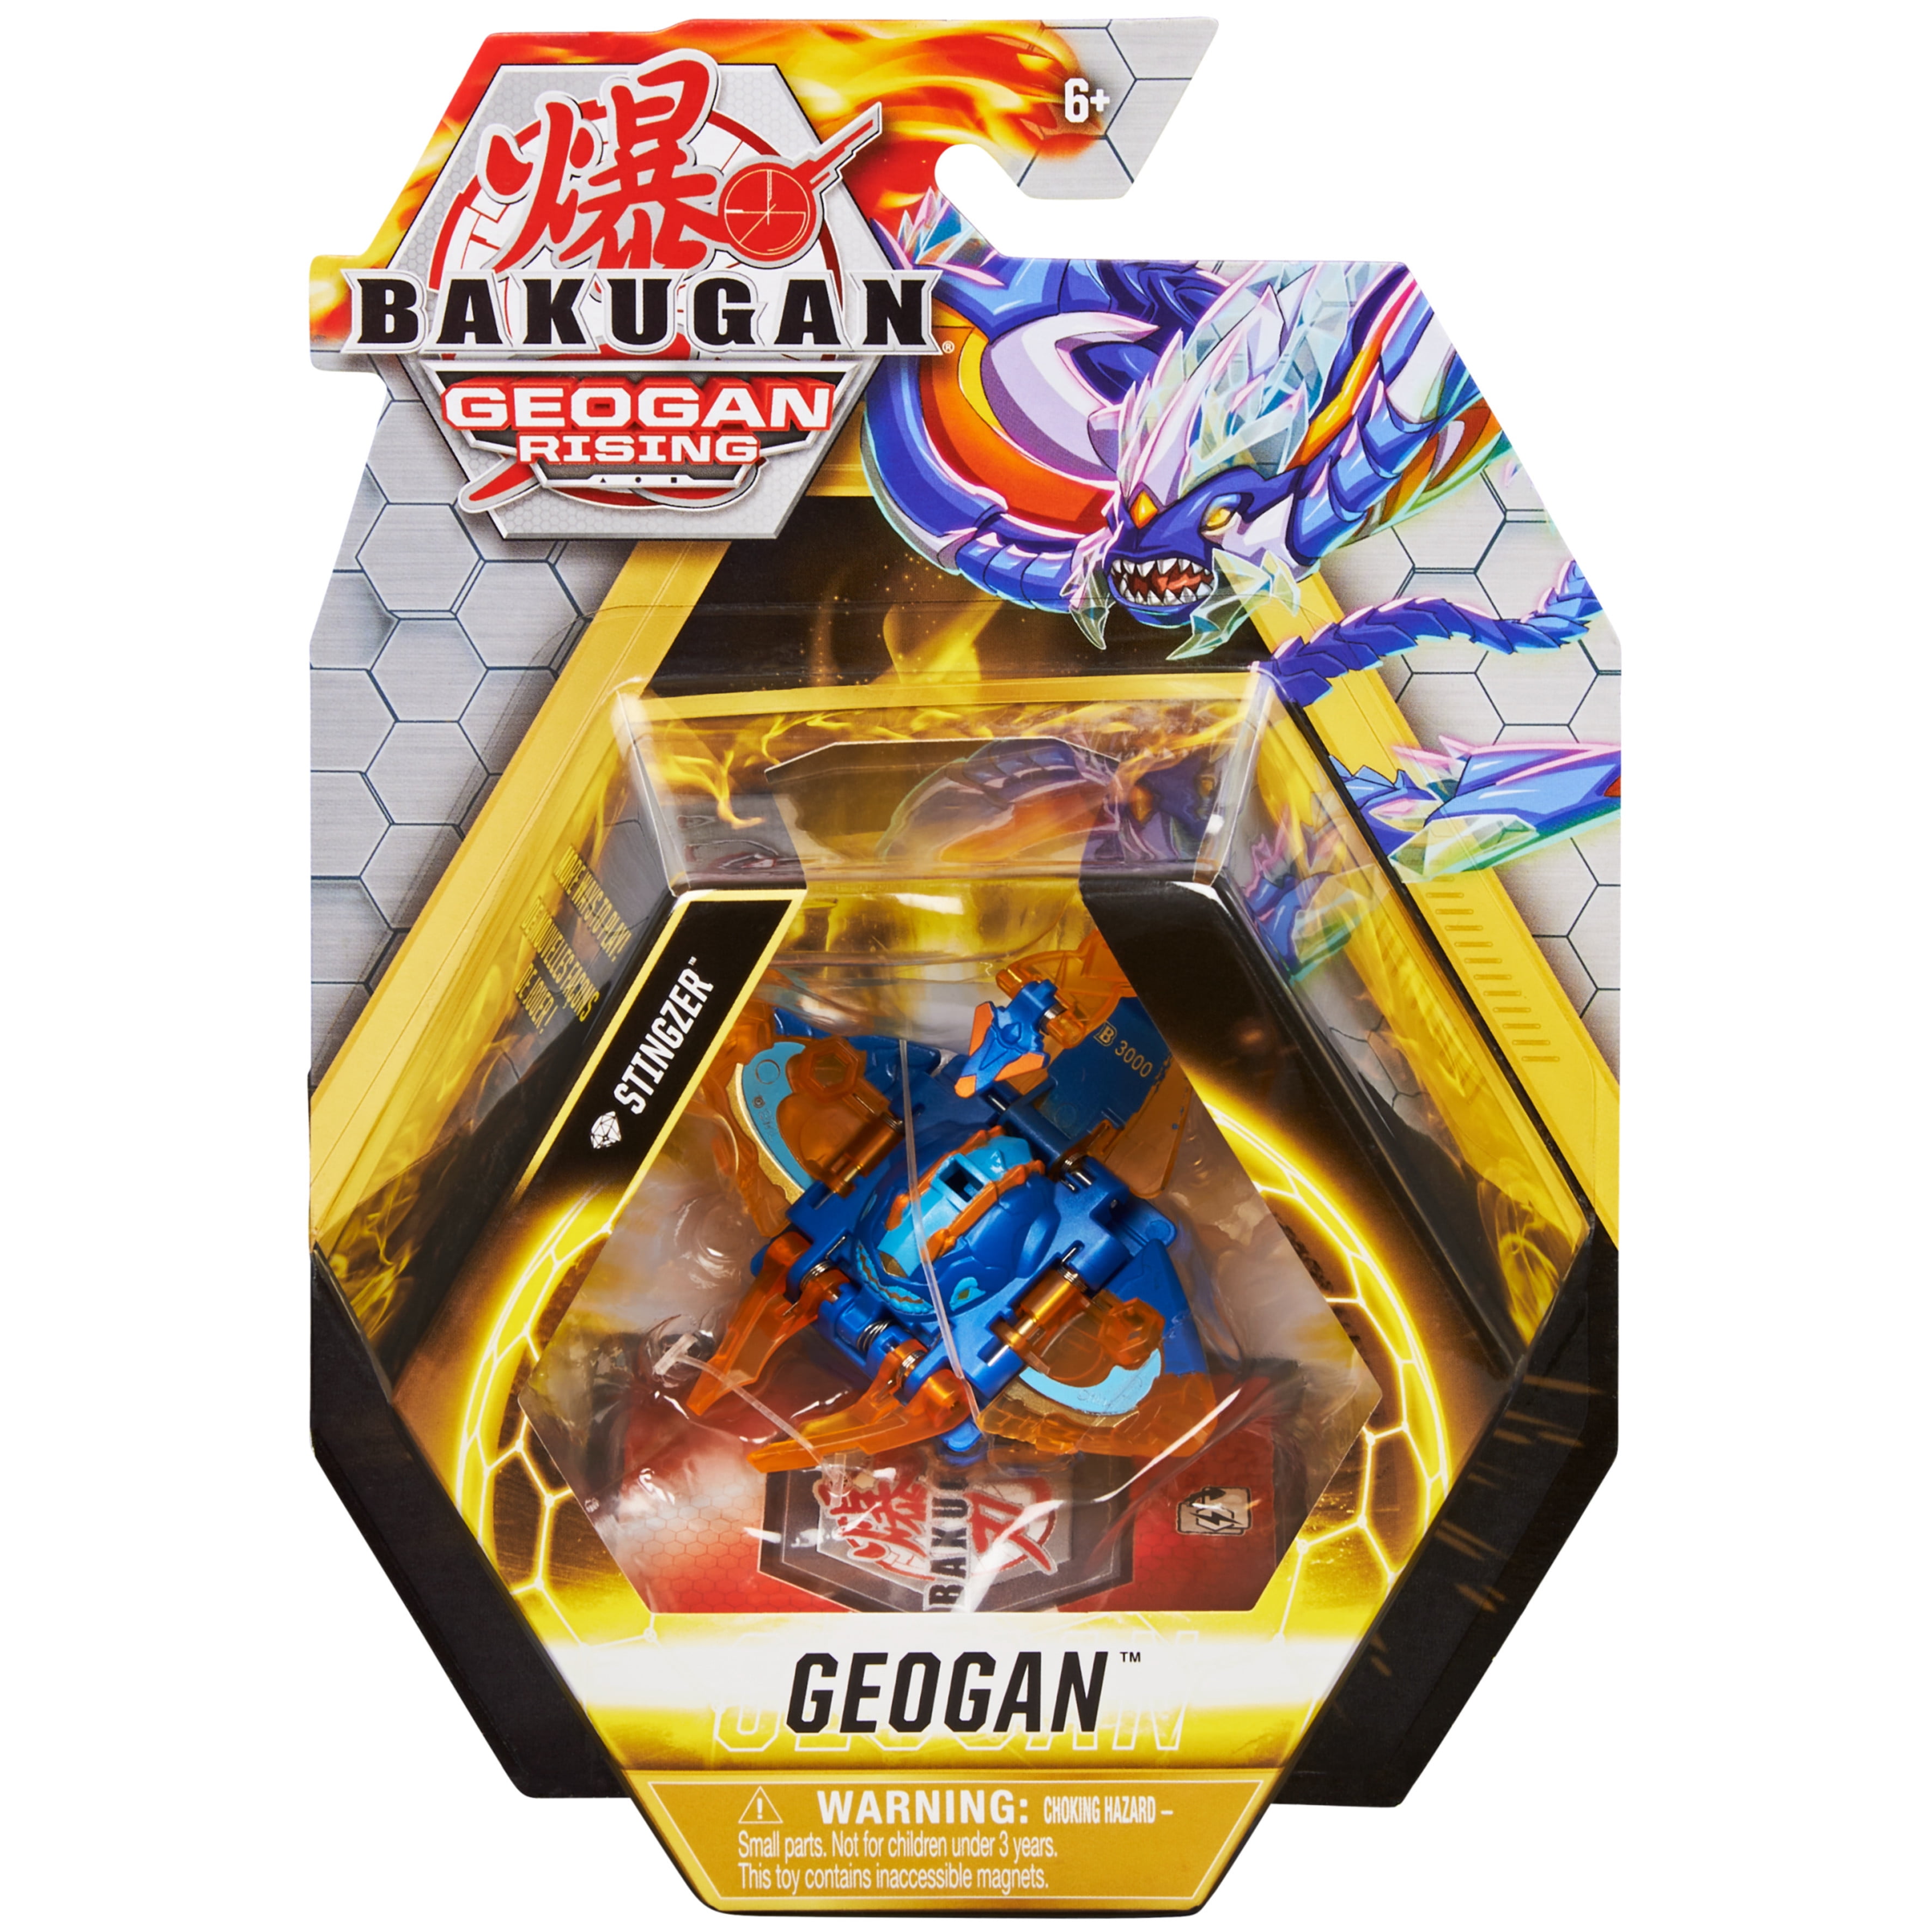  Bakugan Ultimate Viloch, 7-in-1 Exclusive Bakugan, Includes  BakuCores and Trading Cards, Geogan Rising Collectible Action Figure Kids  Toys for Boys